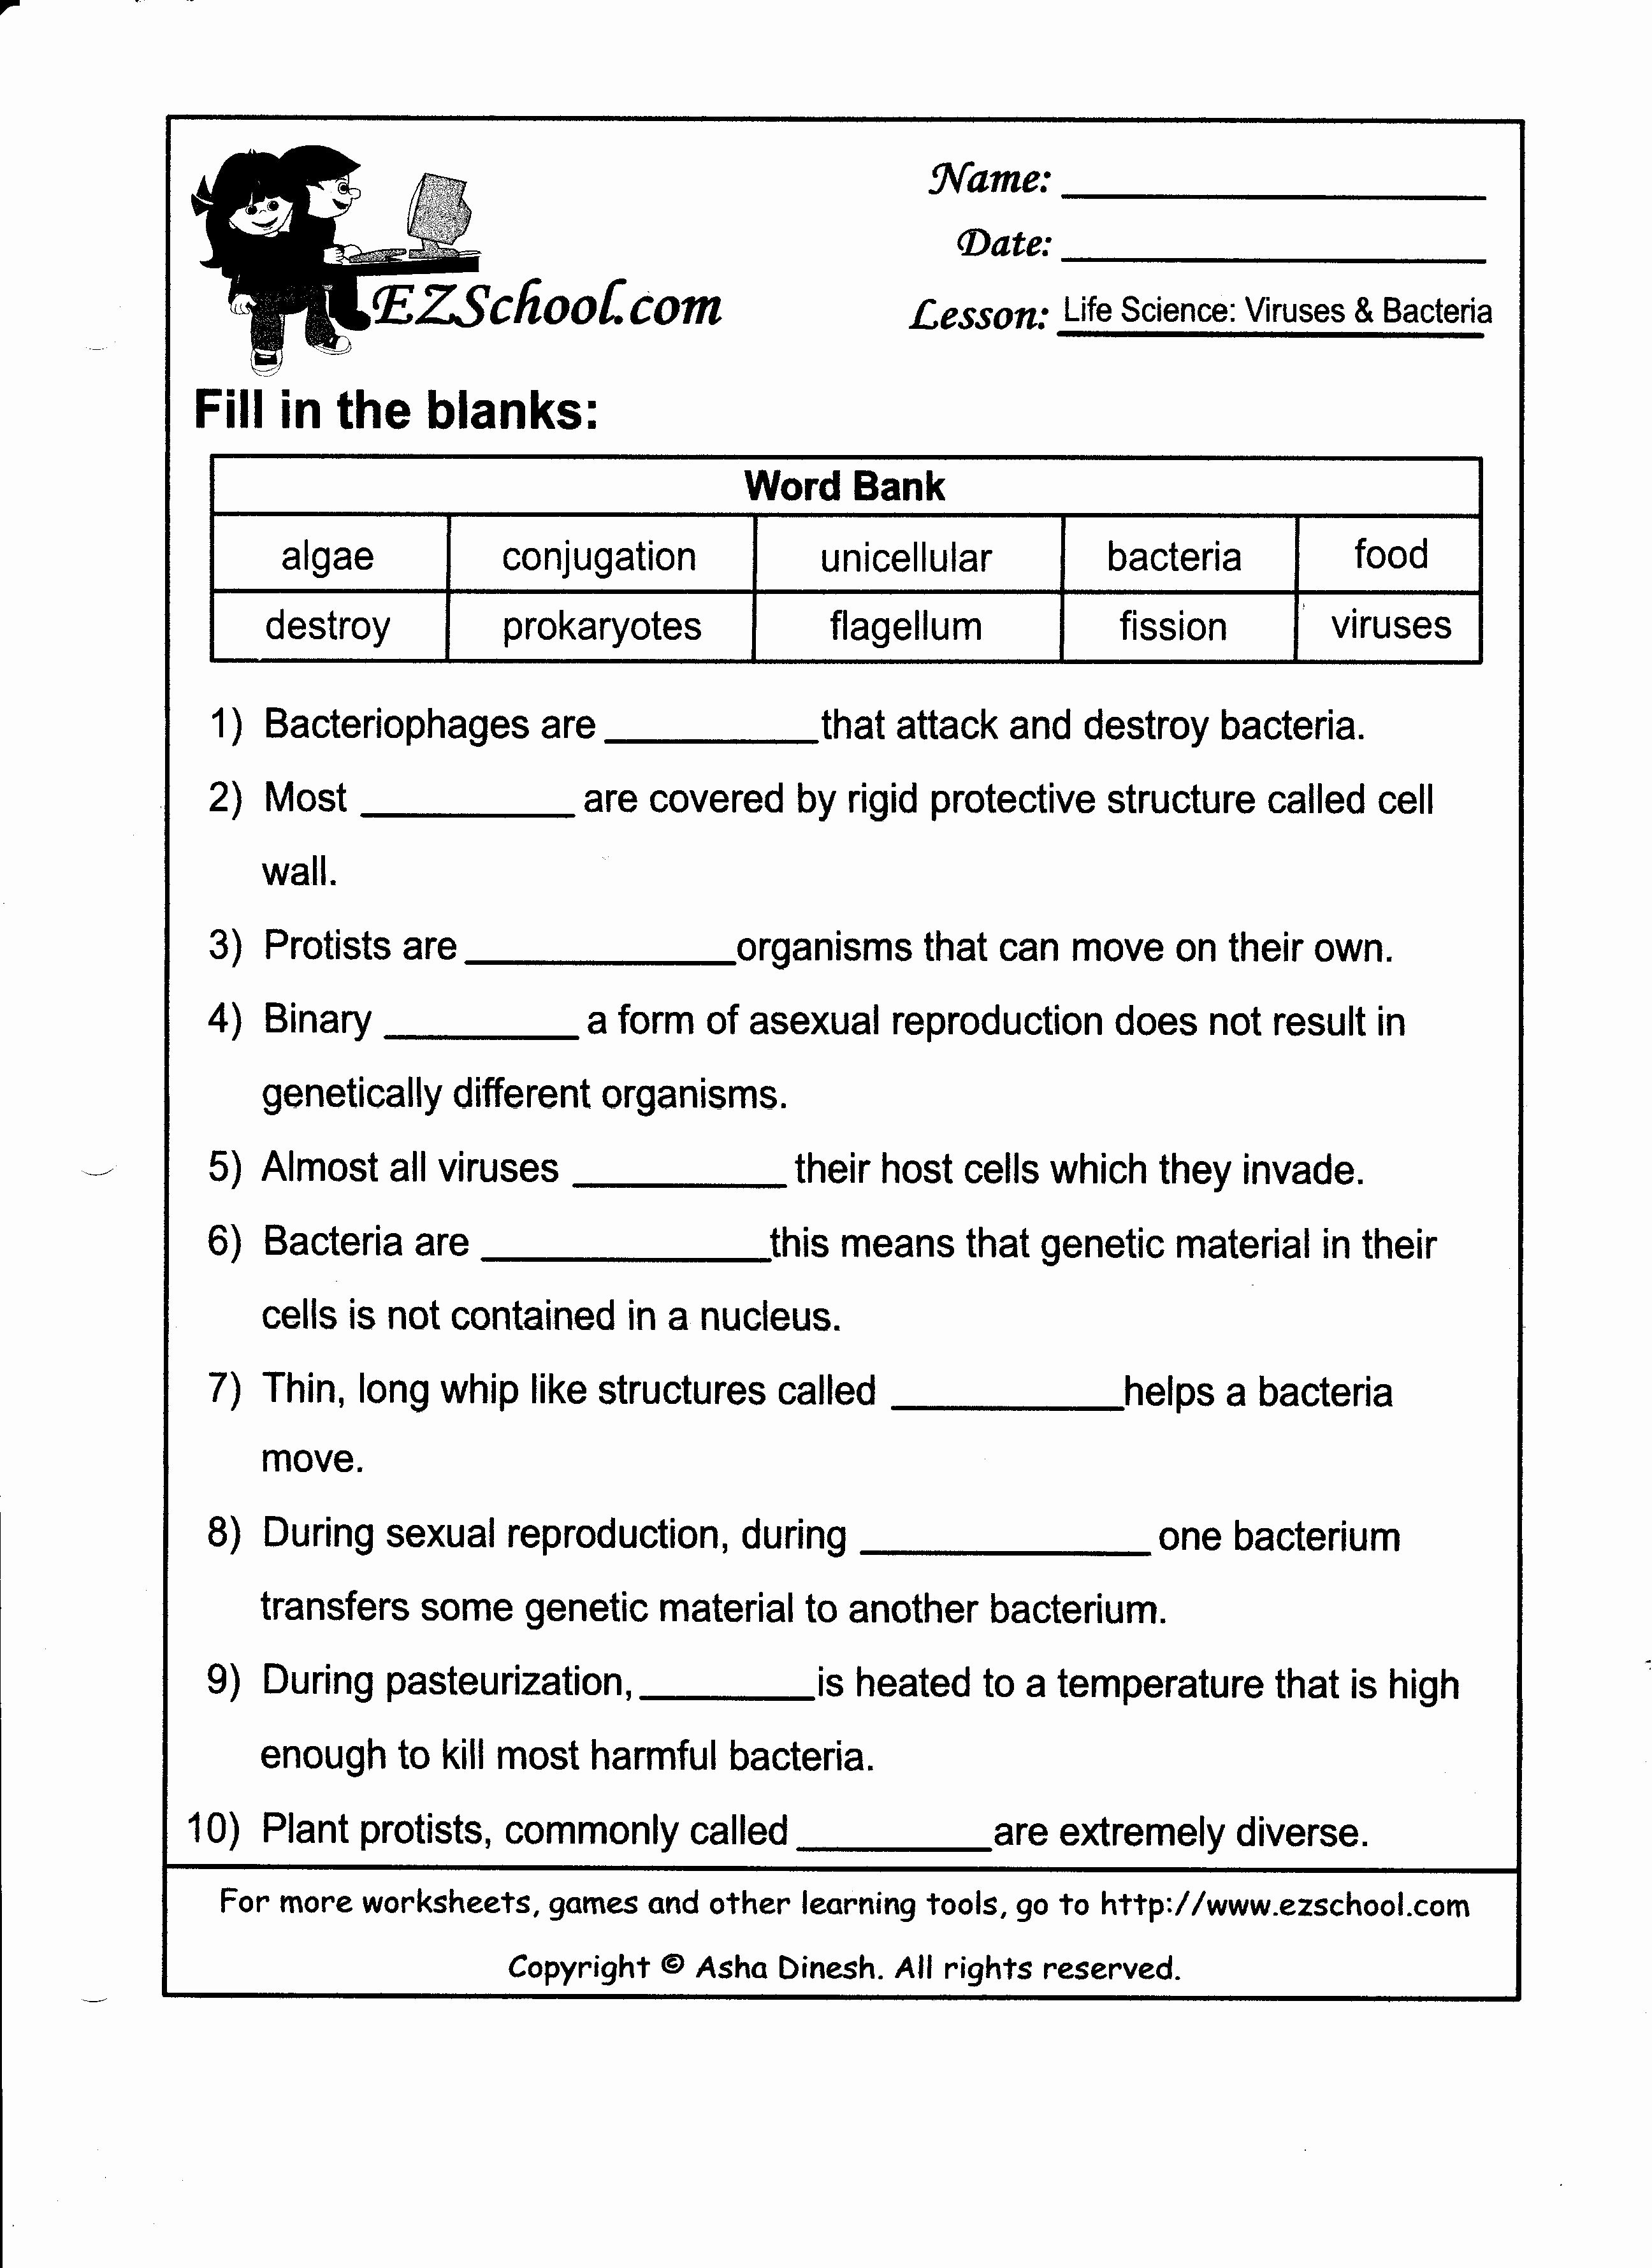 Virus and Bacteria Worksheet Answers Beautiful Week 11 Cell Biology Part 2